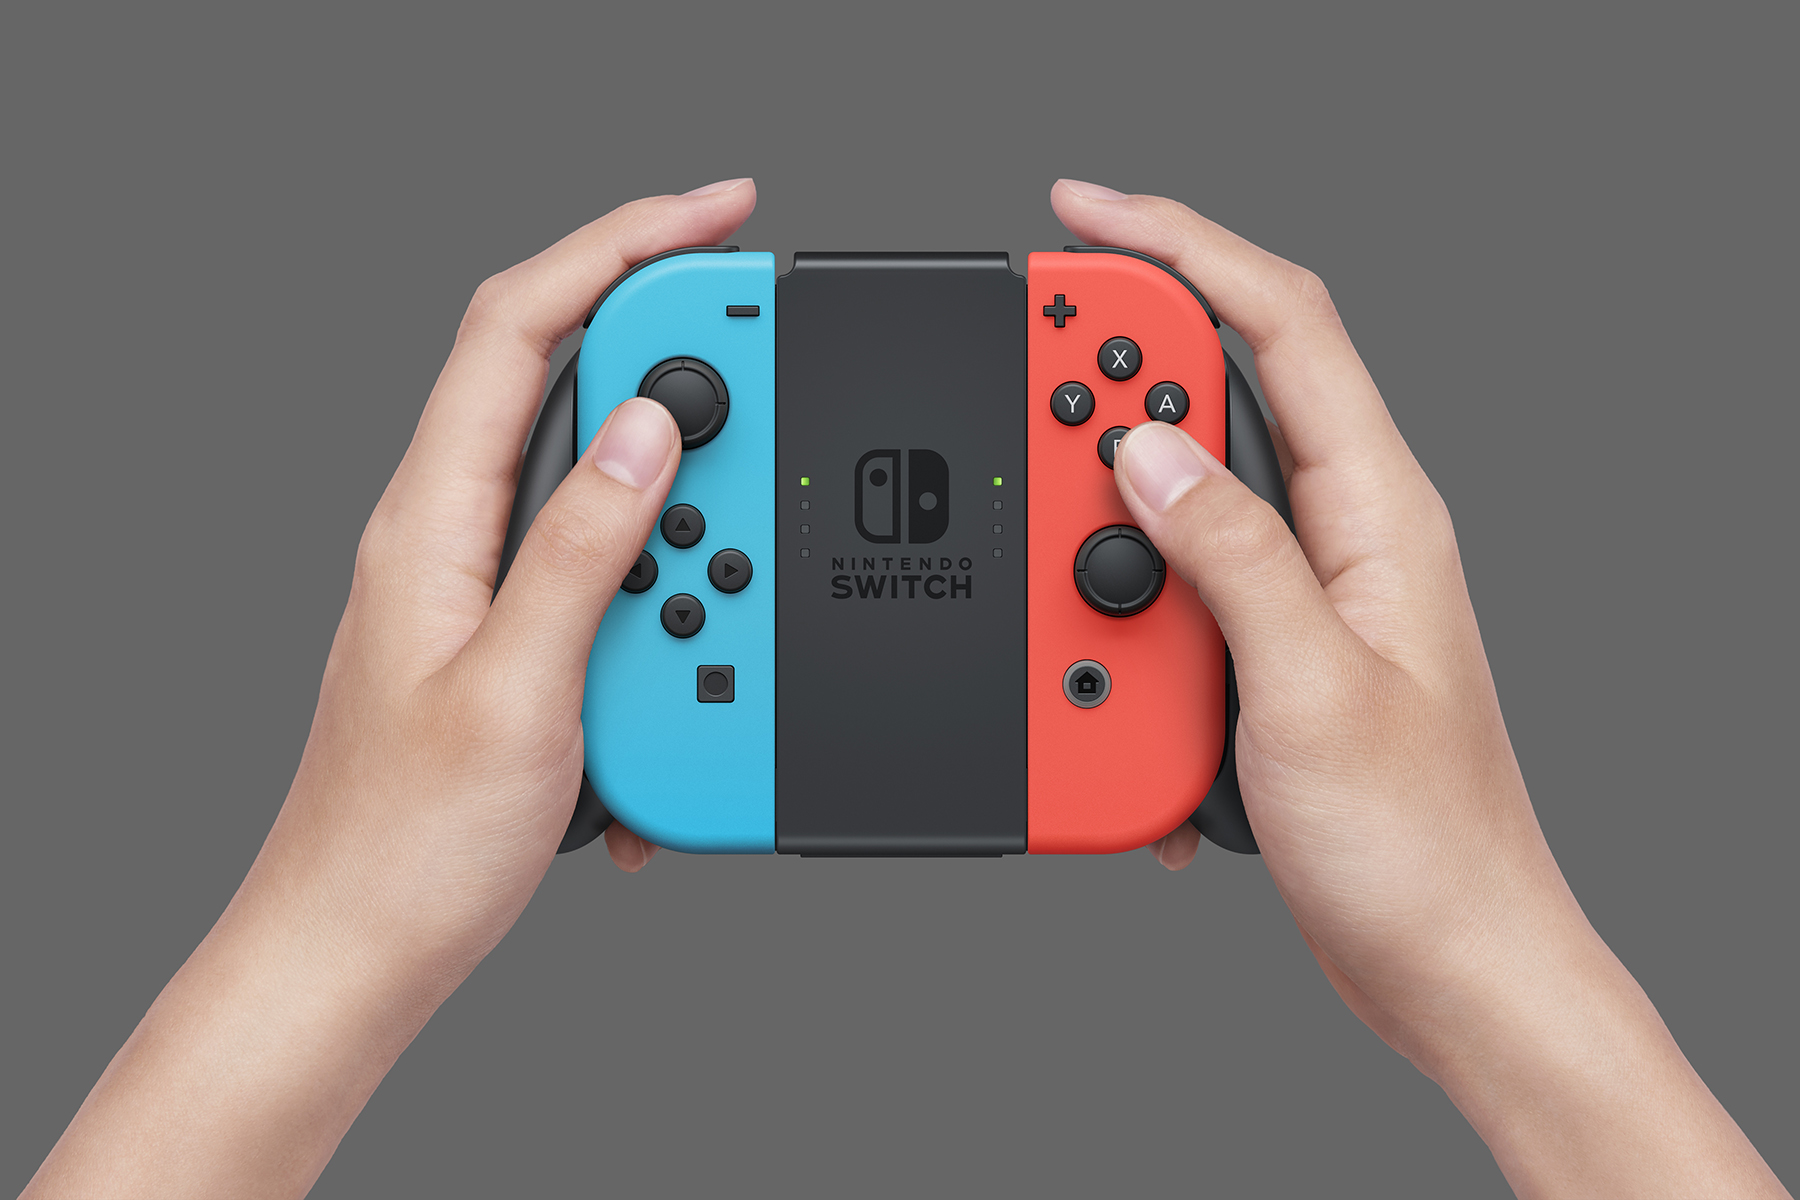 arm Emuler samvittighed How to Connect a Nintendo Switch Controller to Your PC, Mac | Digital Trends